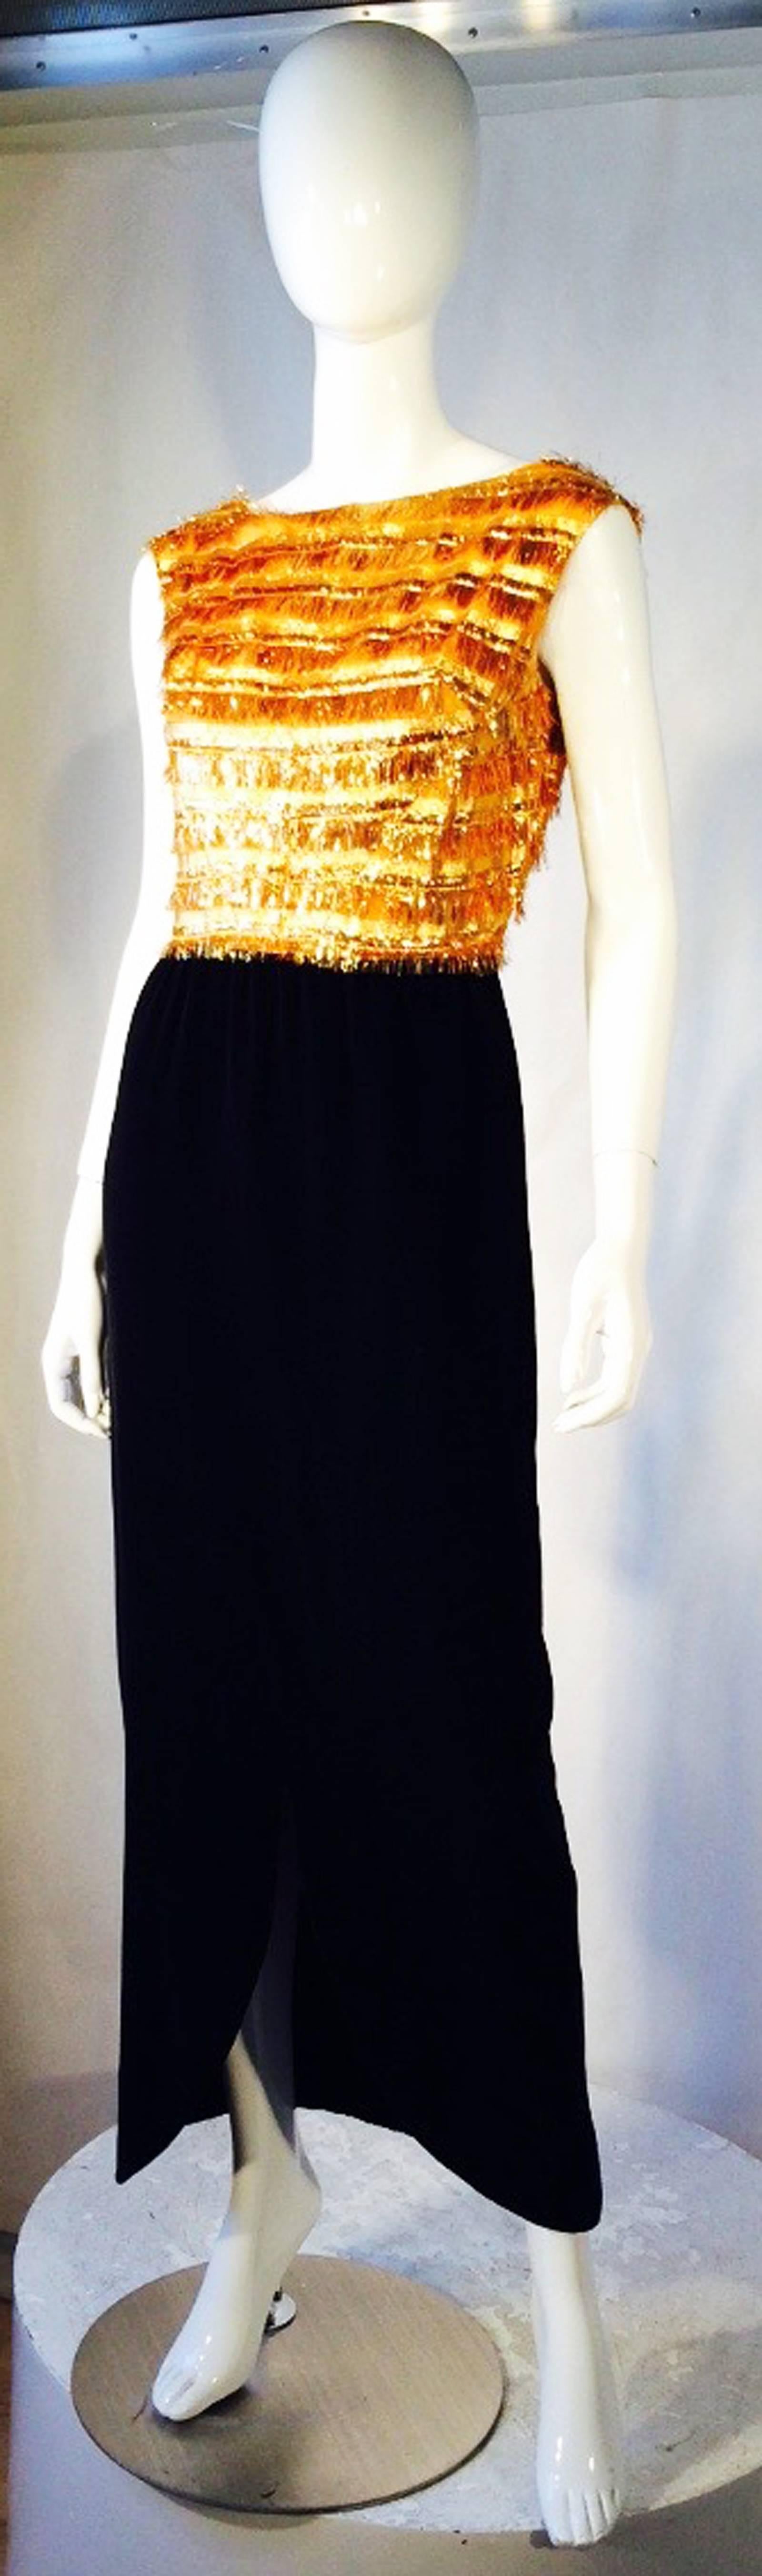 A fine and rare vintage Nina Ricci haute couture evening gown. Authentic metallic gold Lurex 